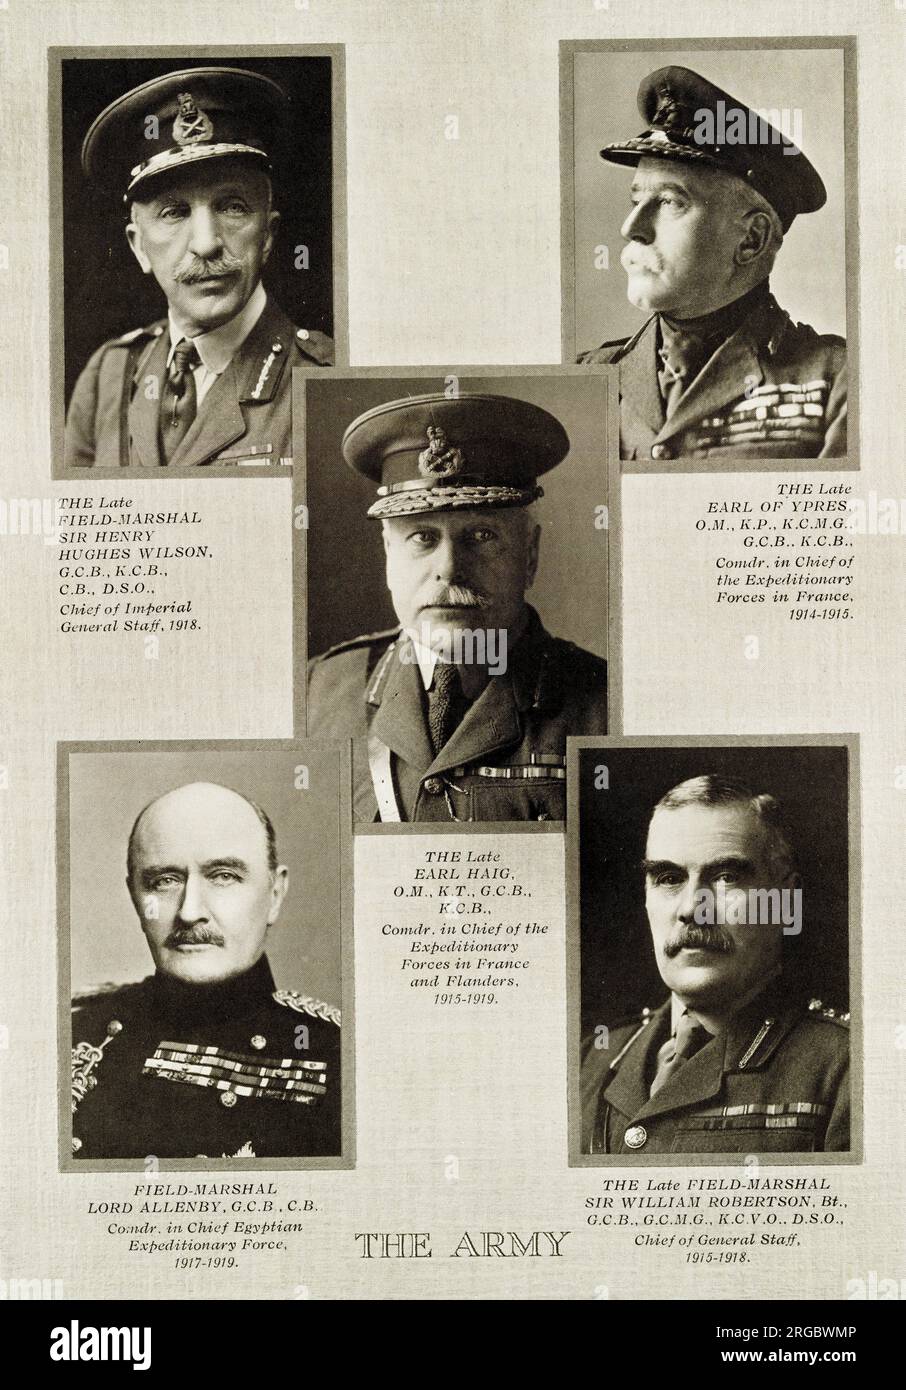 Army leaders during the first 25 years of the reign of King George V: Hughes Wilson, Earl of Ypres, Allenby, Haig, Robertson. Stock Photo